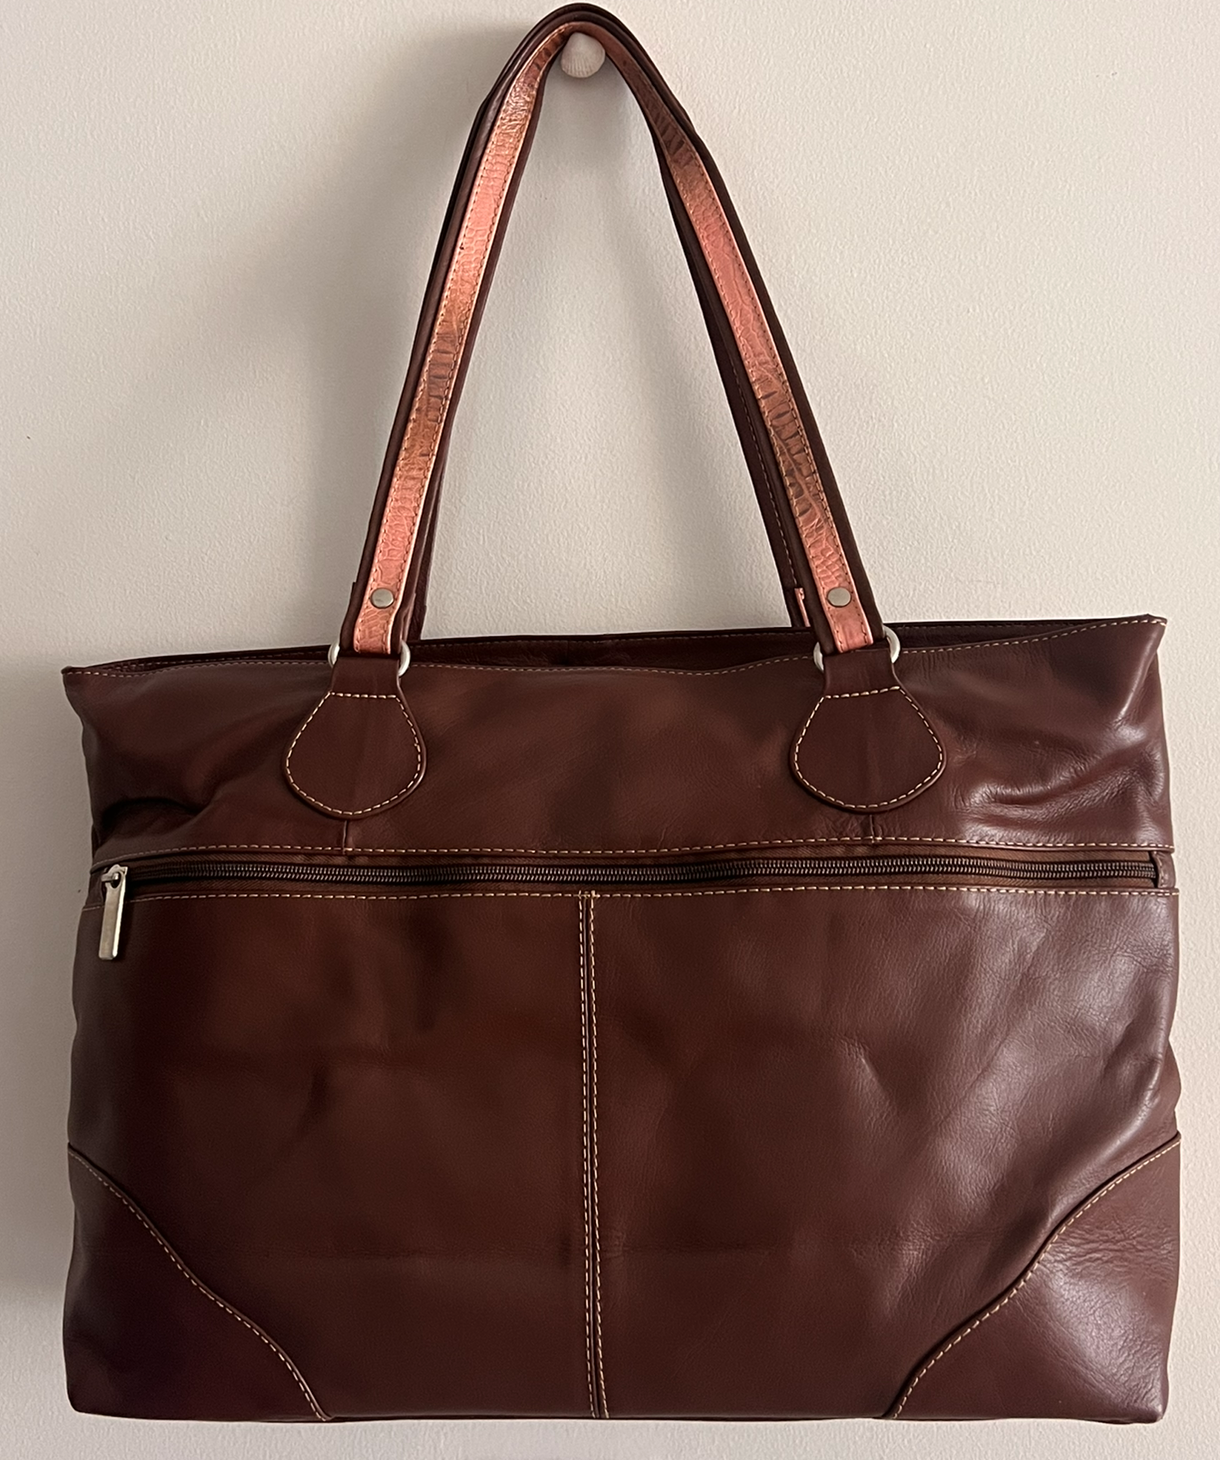 COGNAC LEATHER TOTE Bag, Slouchy Tote, Cognac Handbag for Women, Everyday  Bag, Women Leather Bag, Weekender Oversized Bag, Leather Purse - Etsy |  Leather bag women, Large leather tote bag, Large leather bag